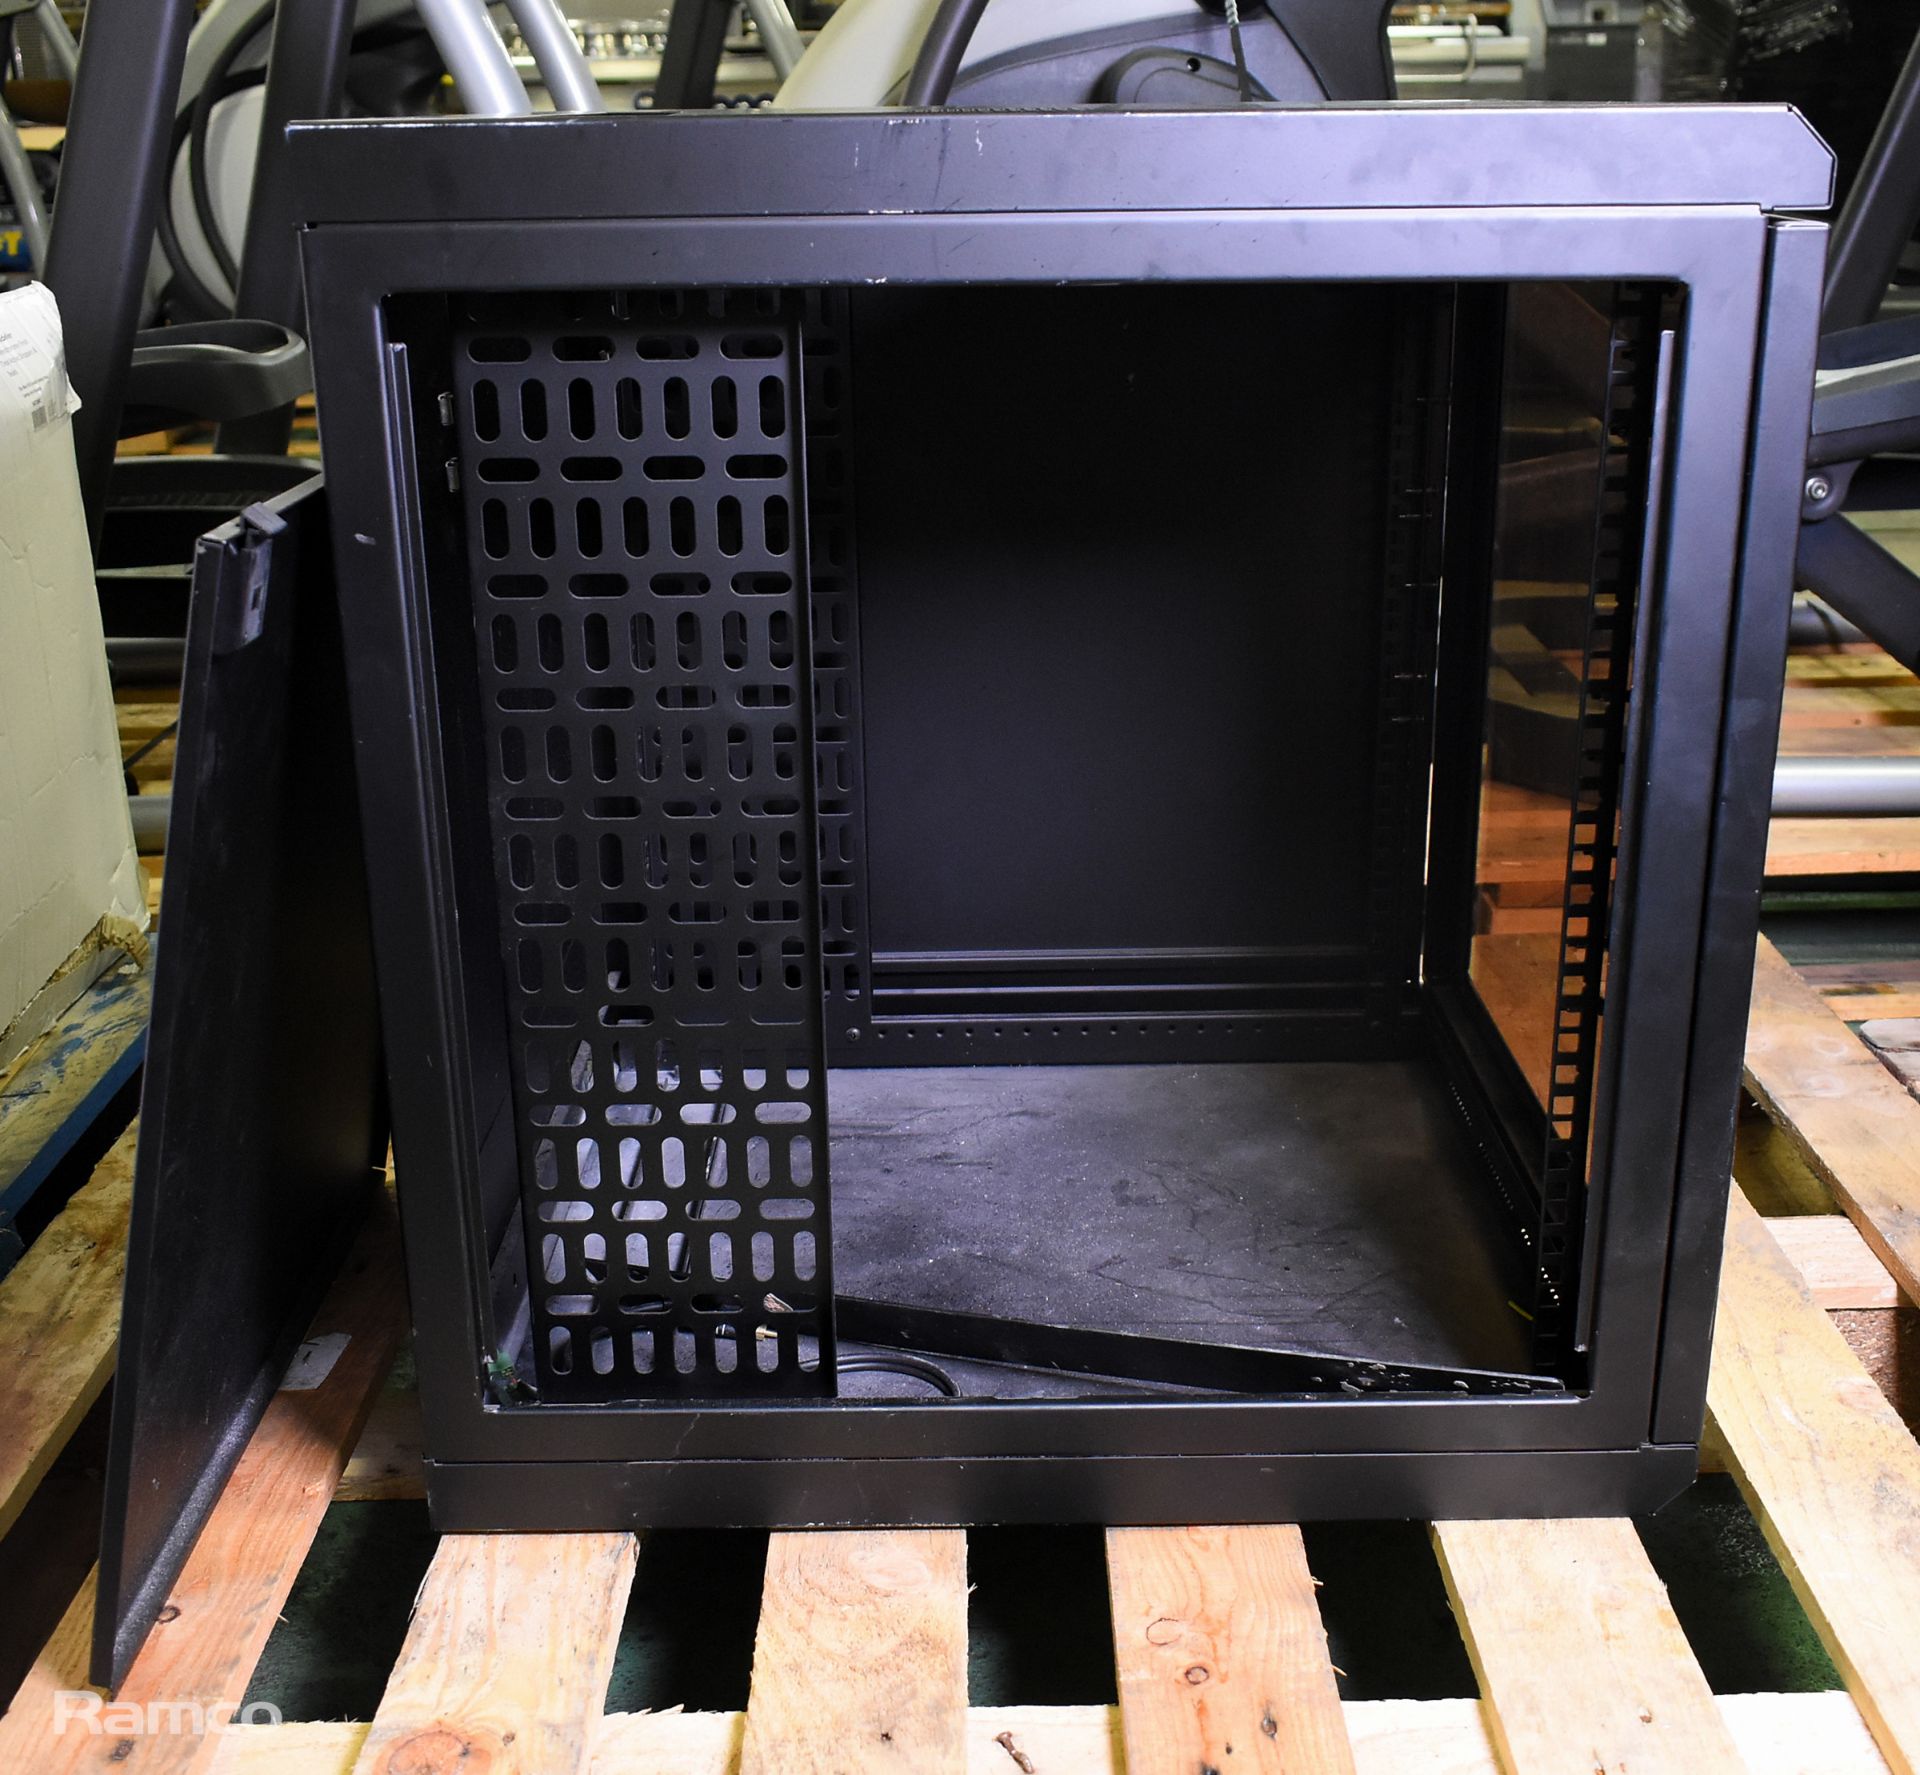 19 inch rack small cabinet - Black - W 600 x D 600 x H 640 mm - Image 3 of 5